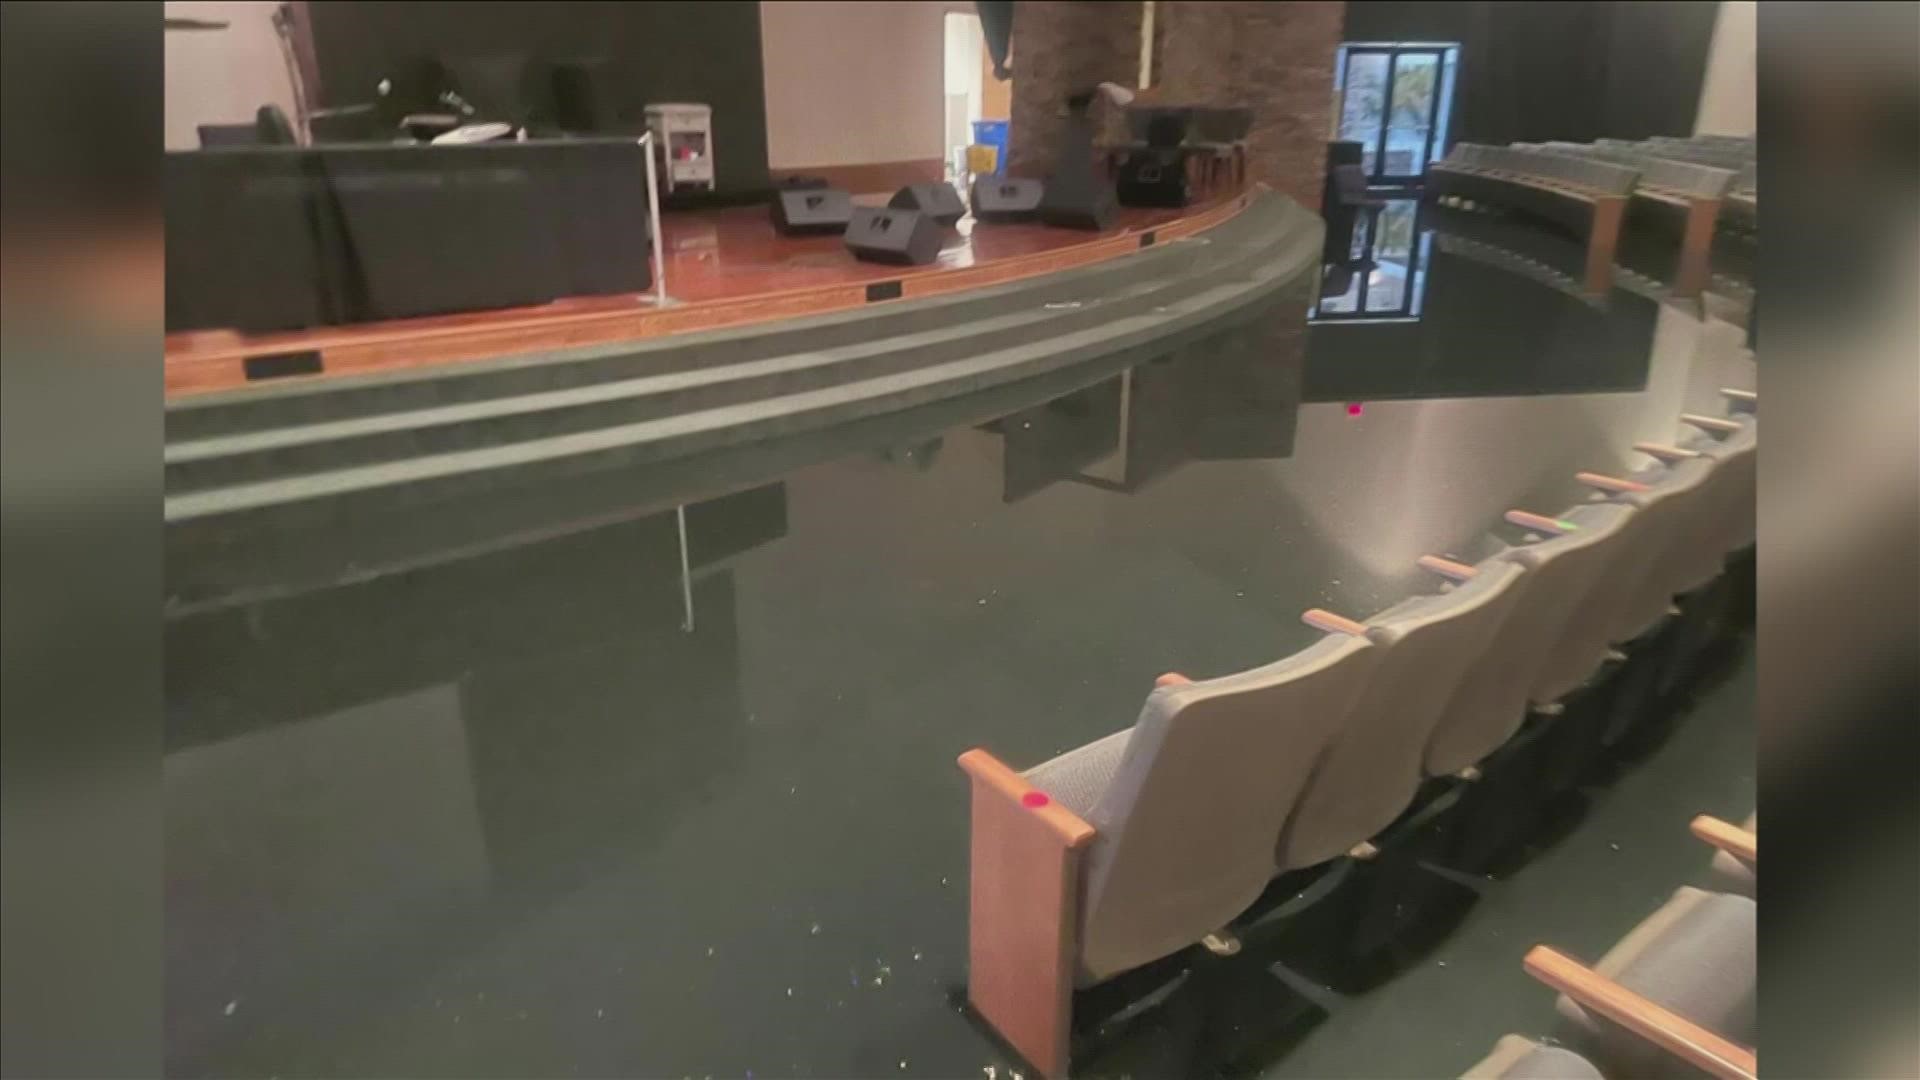 Bishop Linwood Dillard says the church sits on 11 acres with facilities encompassing a little over 50 Sqft; the main sanctuary, the pulpit area and more all flooded.